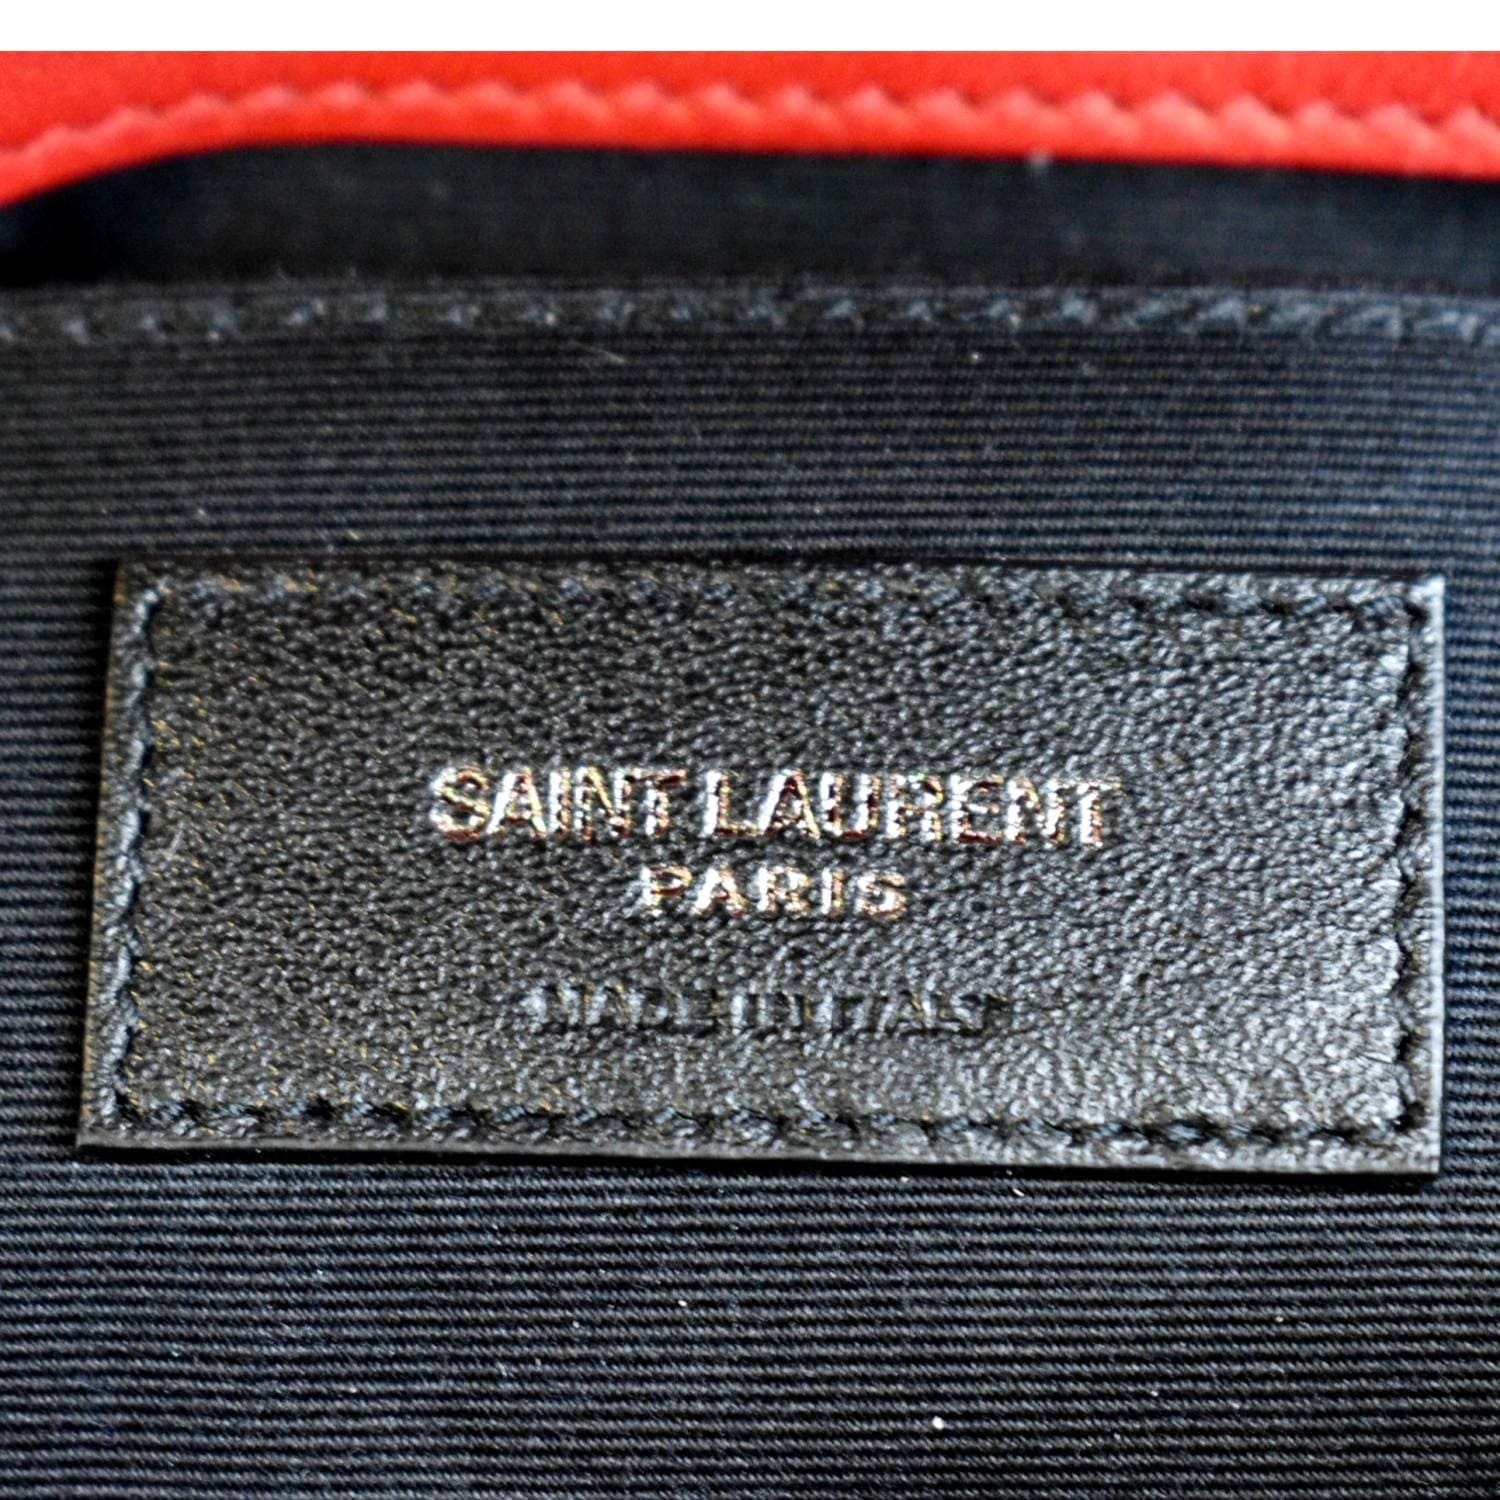 Yves Saint Laurent I Want It Red Cosmetic Bag New with Tags